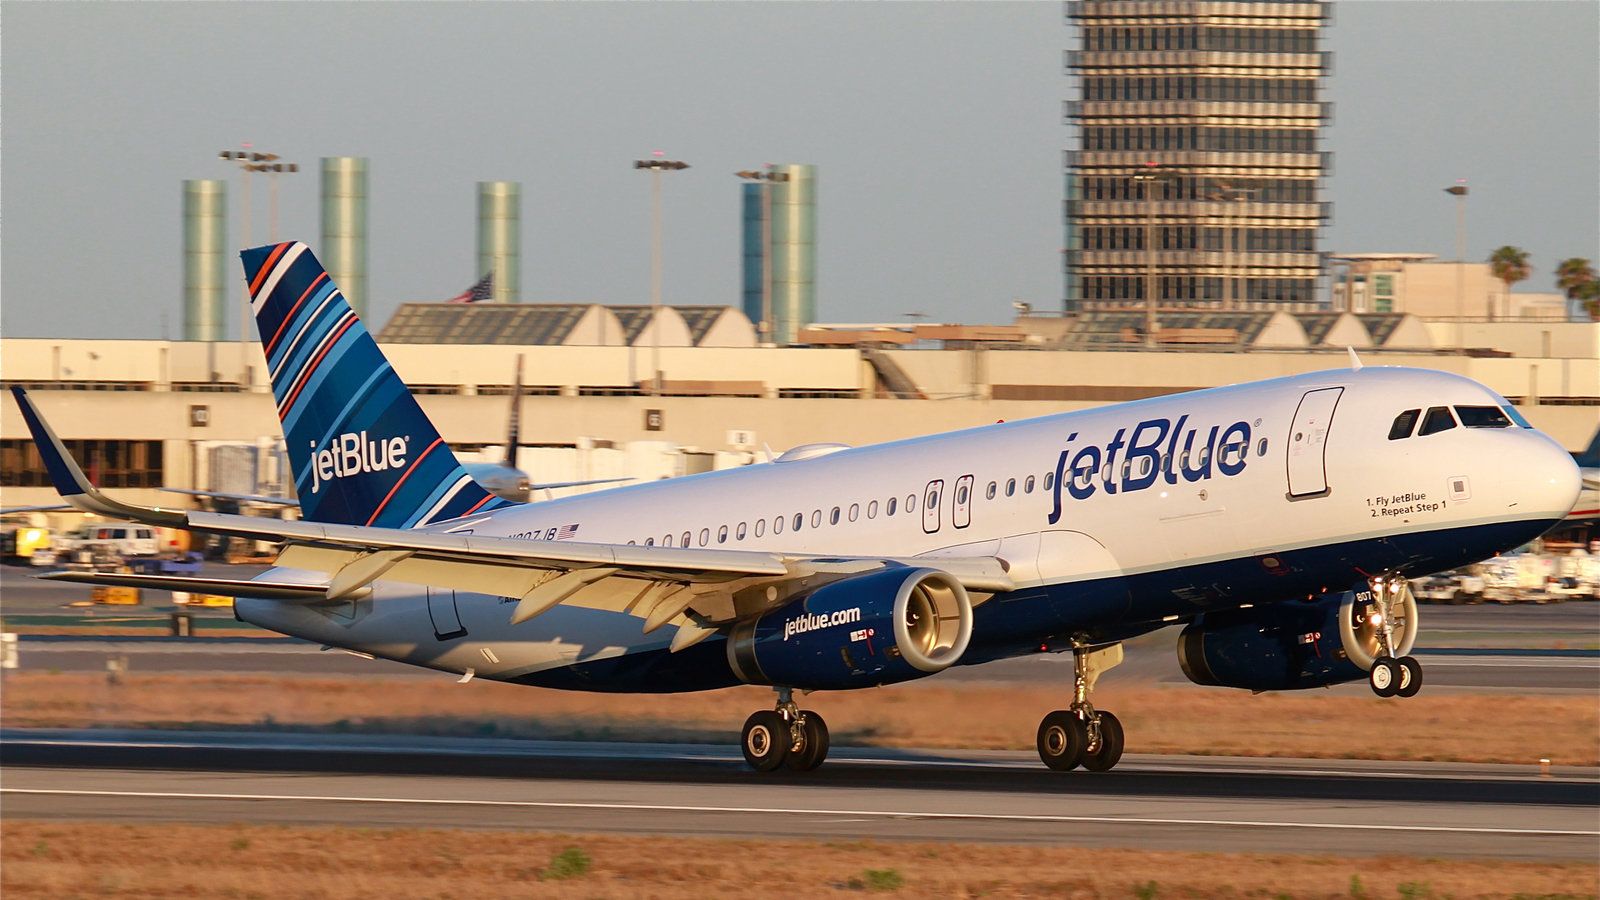 Petition · JetBlue: don't stand for sexual assault · Change.org